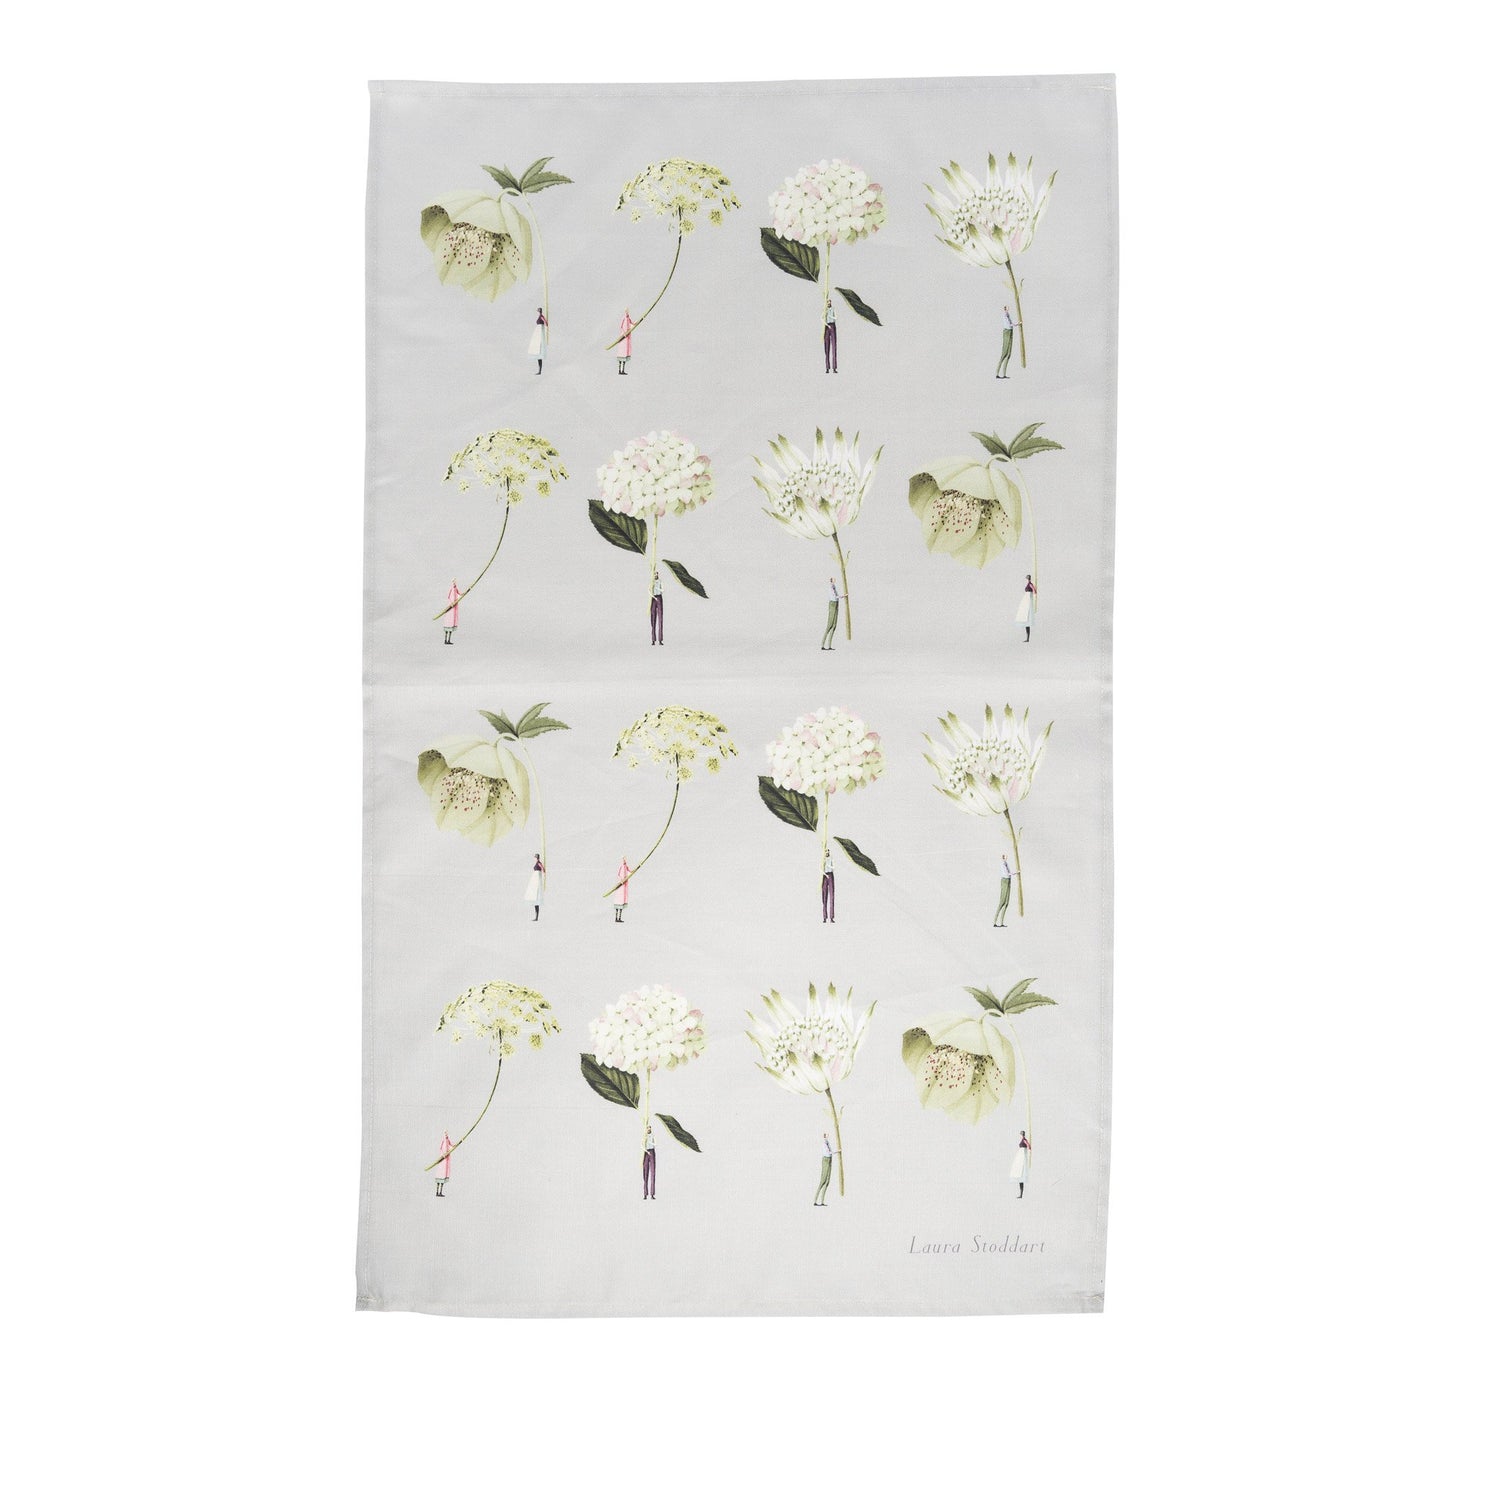 tea towel, linen union, unbleached cotton, illustration, camellia, green flowers, made in england